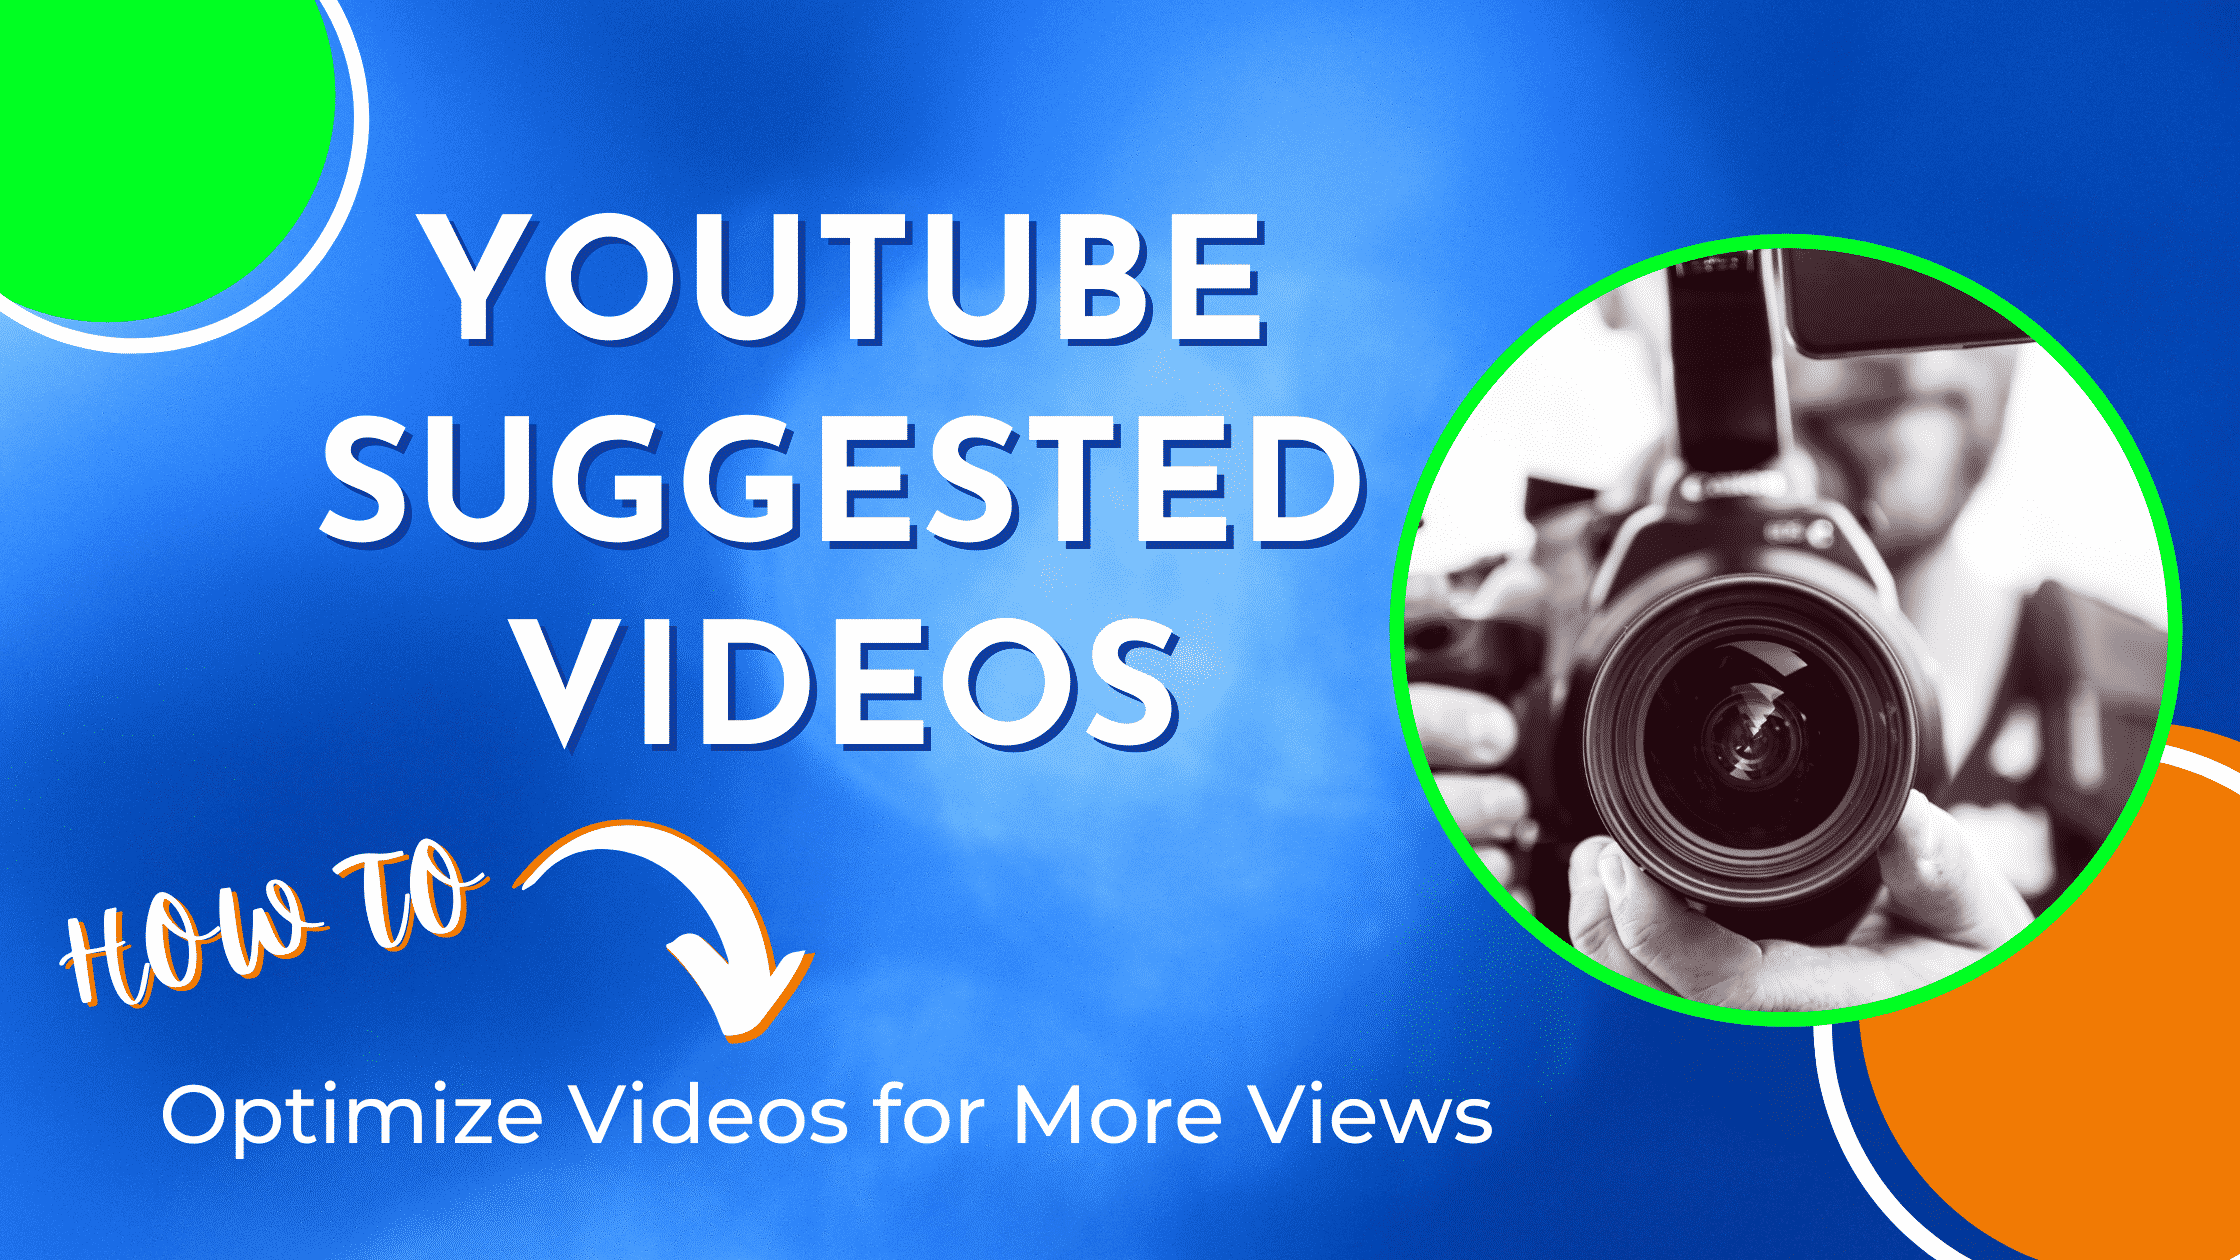 YouTube suggested videos how to optimize for more views